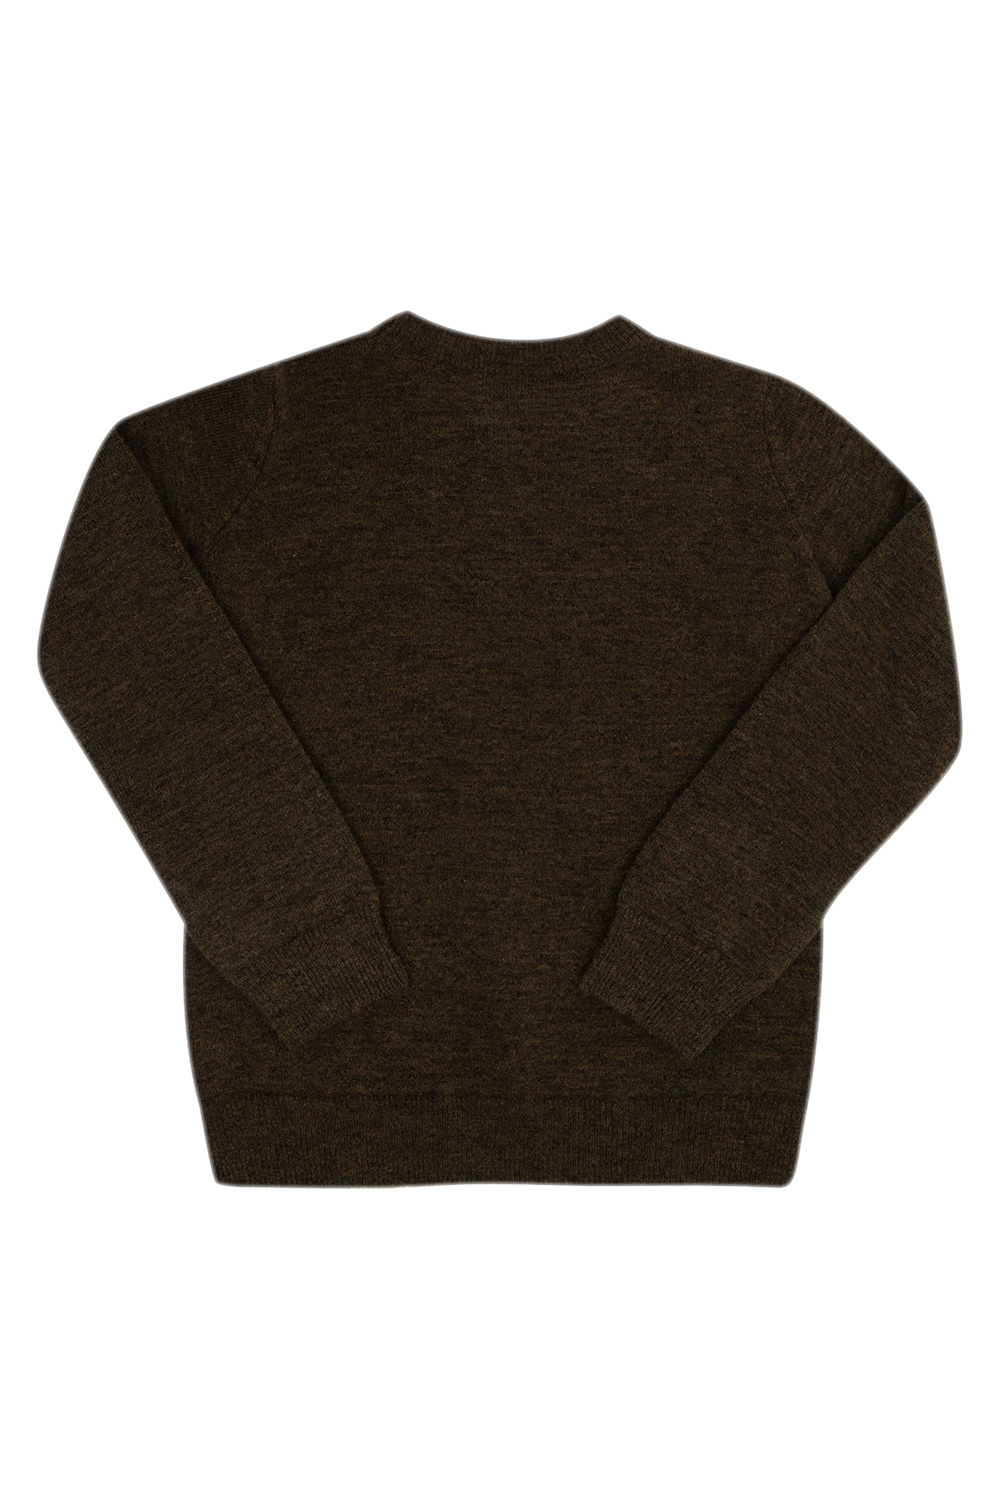 Bonpoint  Long-sleeved sweater